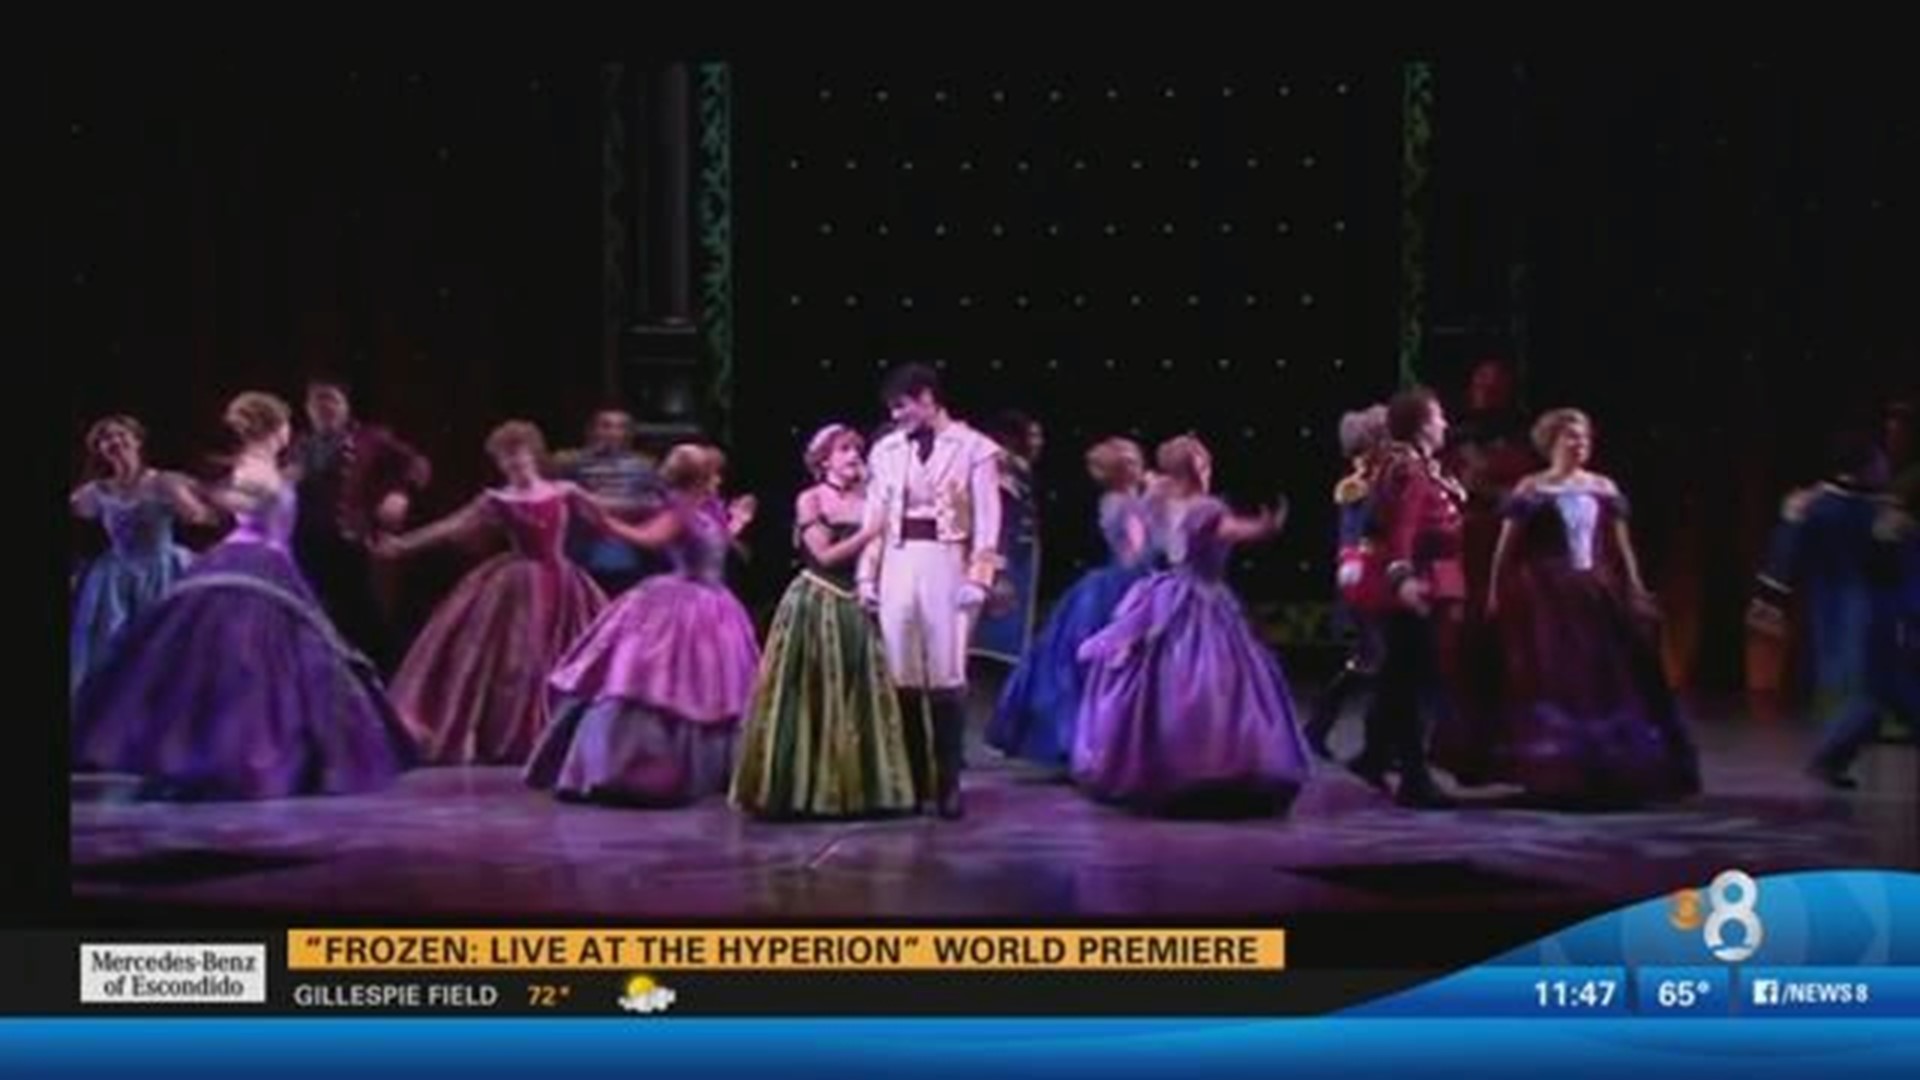 World Premier: Frozen LIVE at the Hyperion